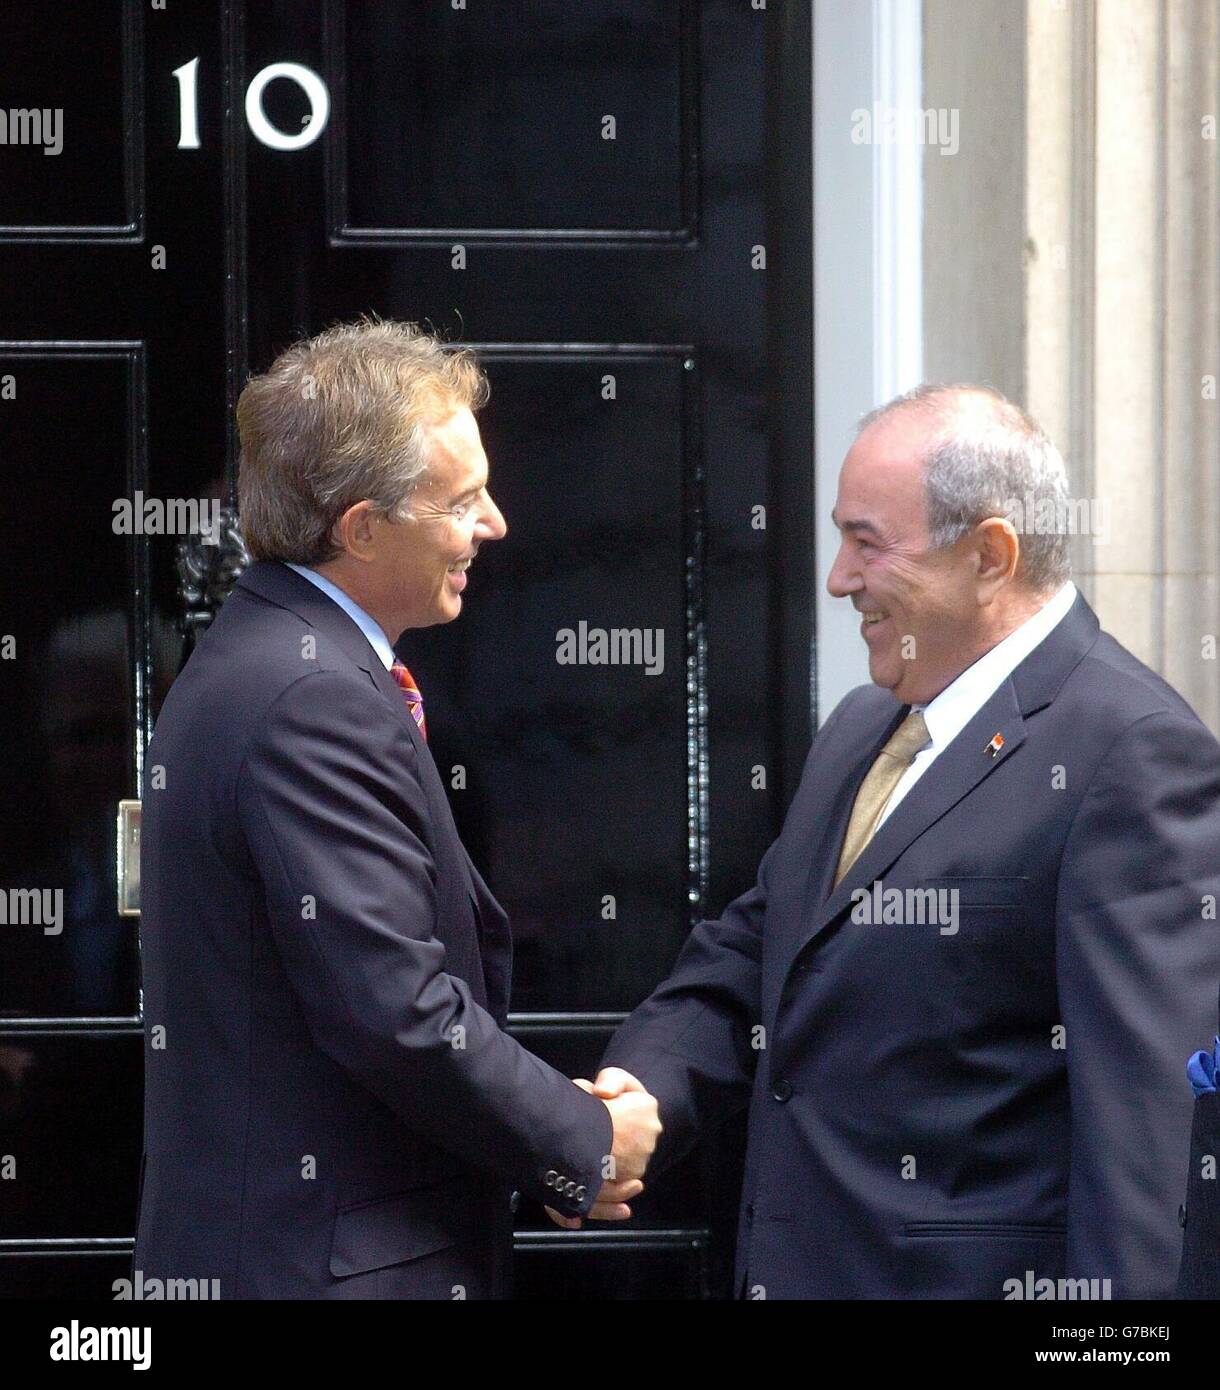 British Prime Minister Tony Blair greets the Iraqi Prime Minister Iyad Allawi on the steps of 10 Downing Street, London. The Downing Street talks are likely to focus on whether elections in Iraq can still go ahead in January as planned despite the ferocious violence unleashed there in the last few weeks. Their meeting comes after Mr Blair played down claims that he had been warned a year before the war to oust Saddam Hussein of the chaos that might follow. Stock Photo